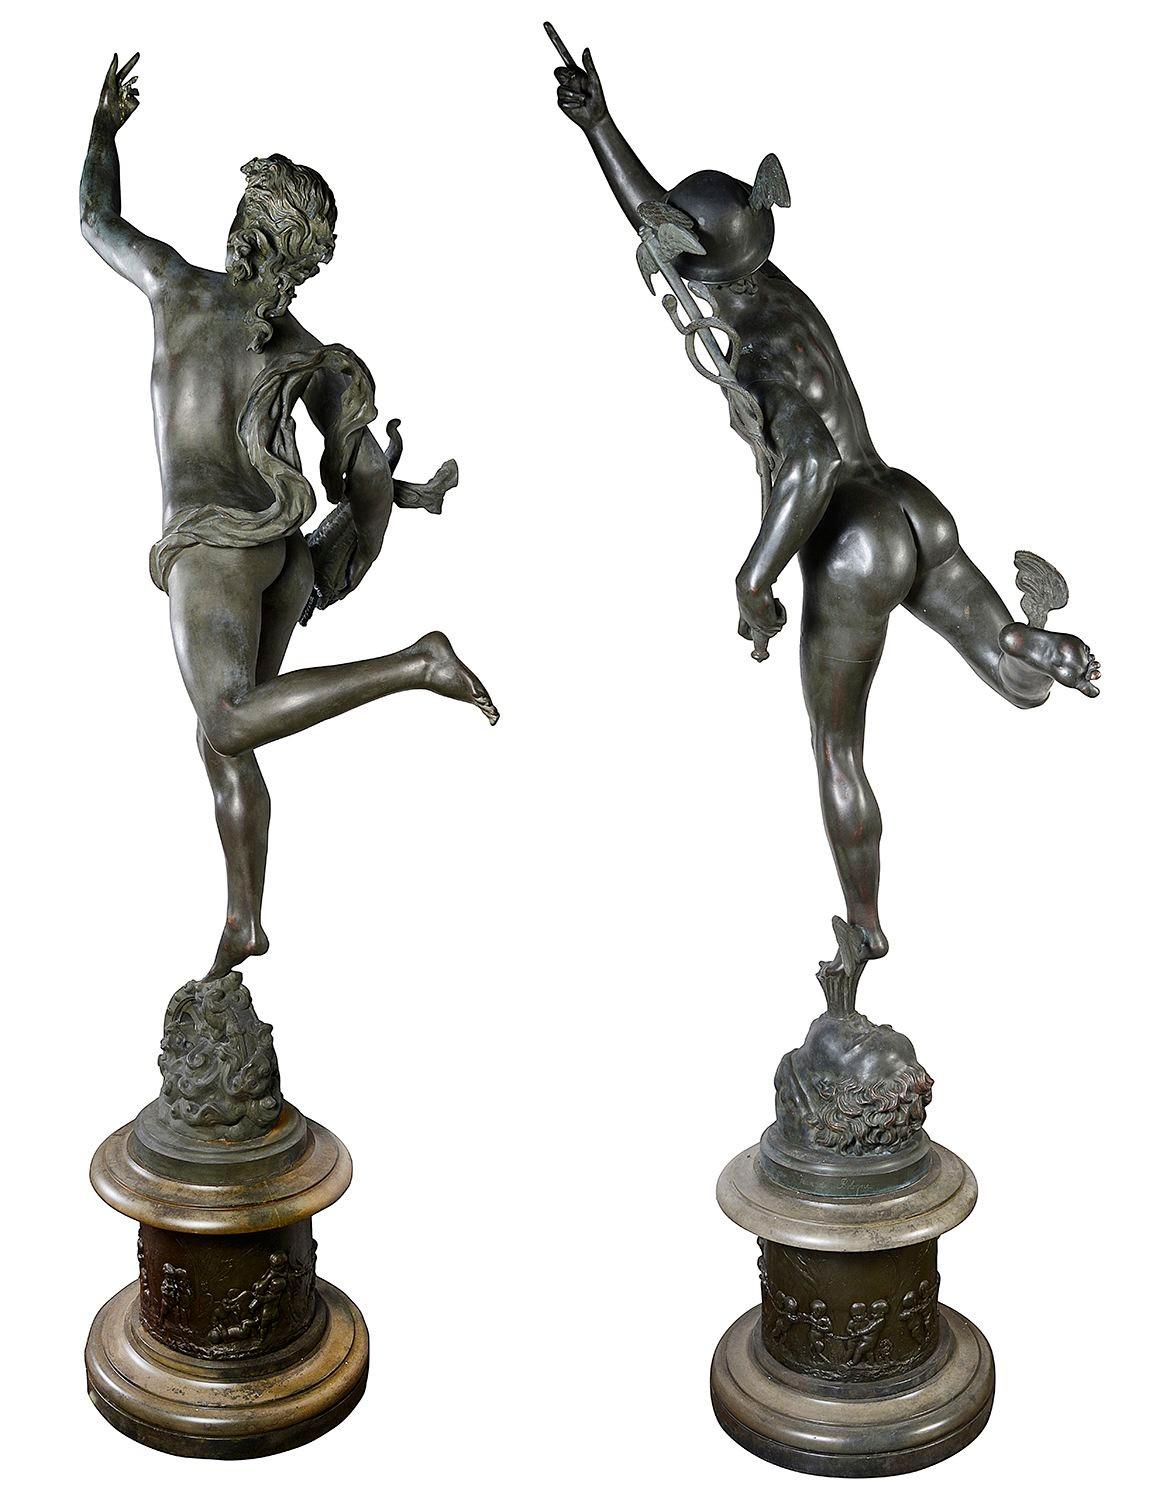 A wonderfully impressive pair of 19th Century verdigri patinated bronze statues of Mercury and Fortuna, after Jean de Bologne, each raised on circular pedestals with bacchus influenced scenes of putti playing with Rams and donkeys. Then further